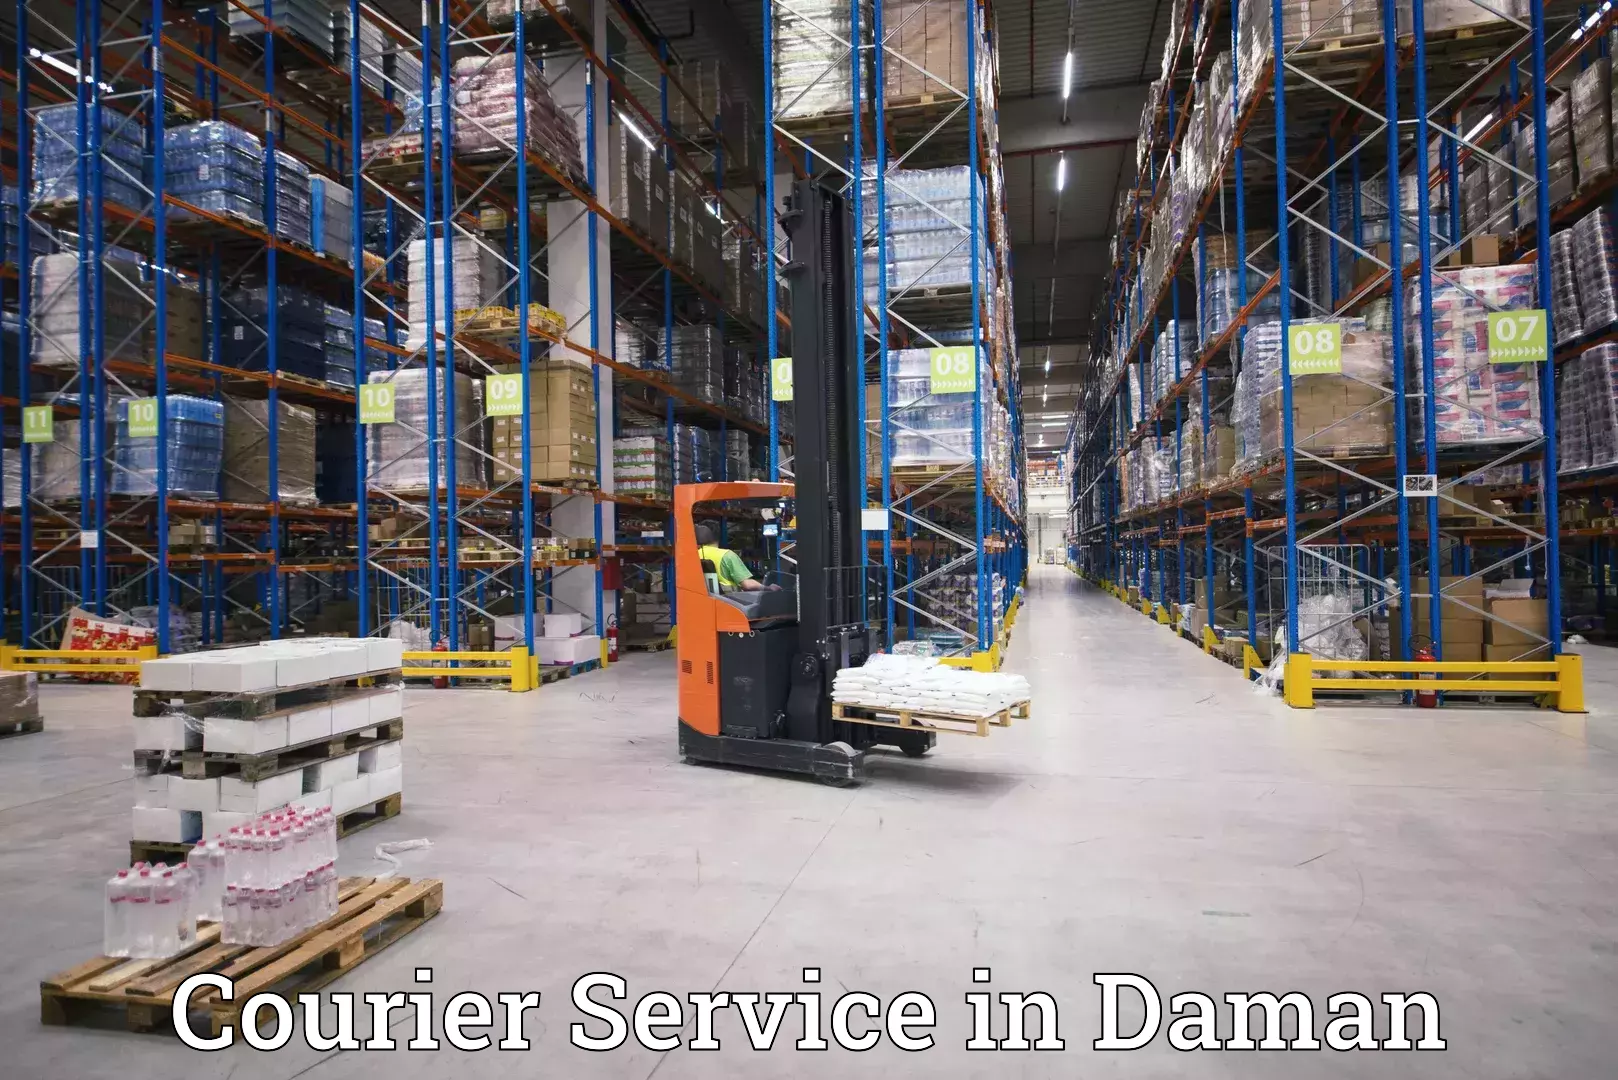 High-priority parcel service in Daman